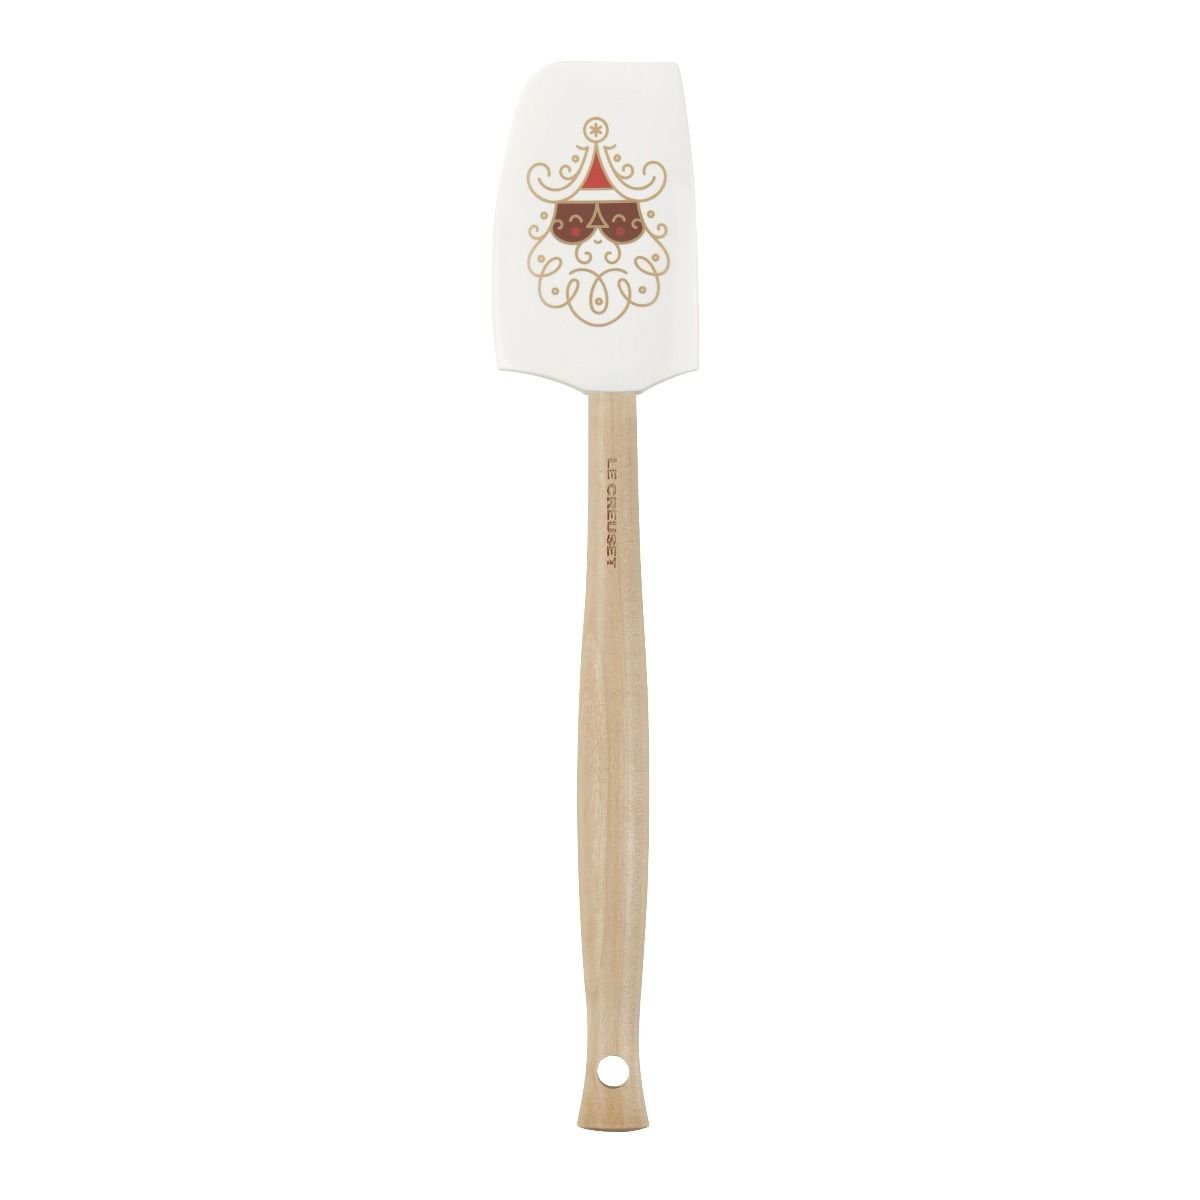 Cheer Collection 12 Piece Silicone Spatula Set with Wooden Handles